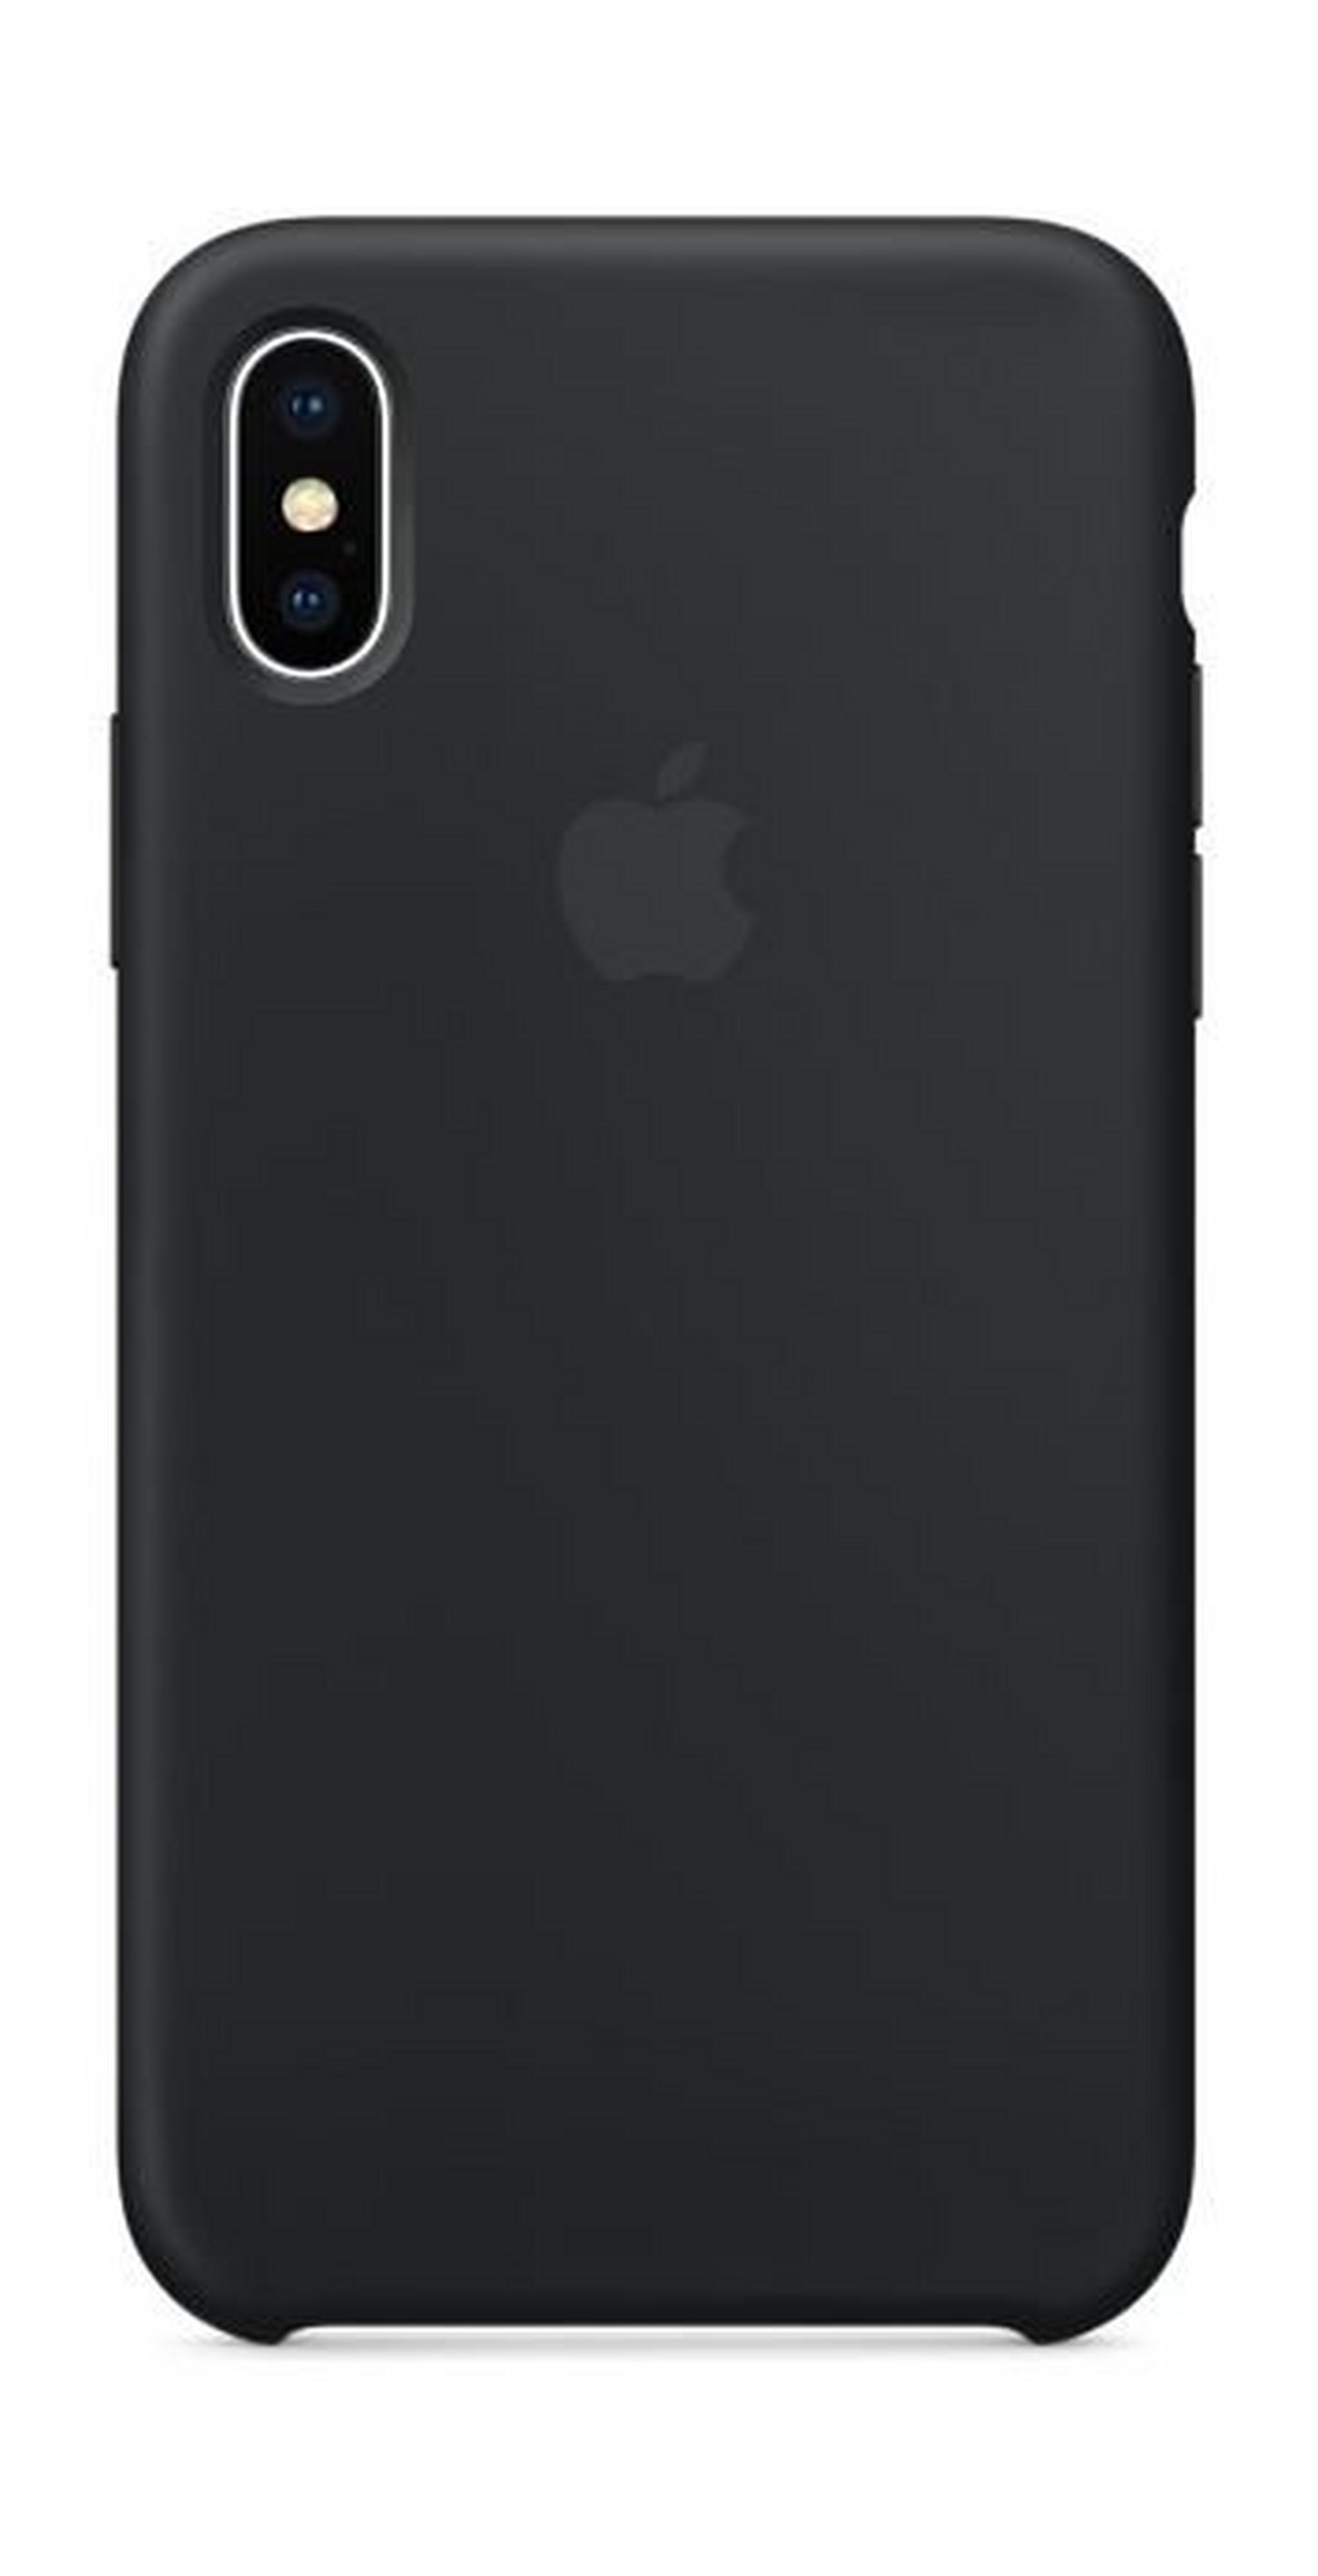 Apple Silicone Case For iPhone X (MQT12ZM/A) - Black